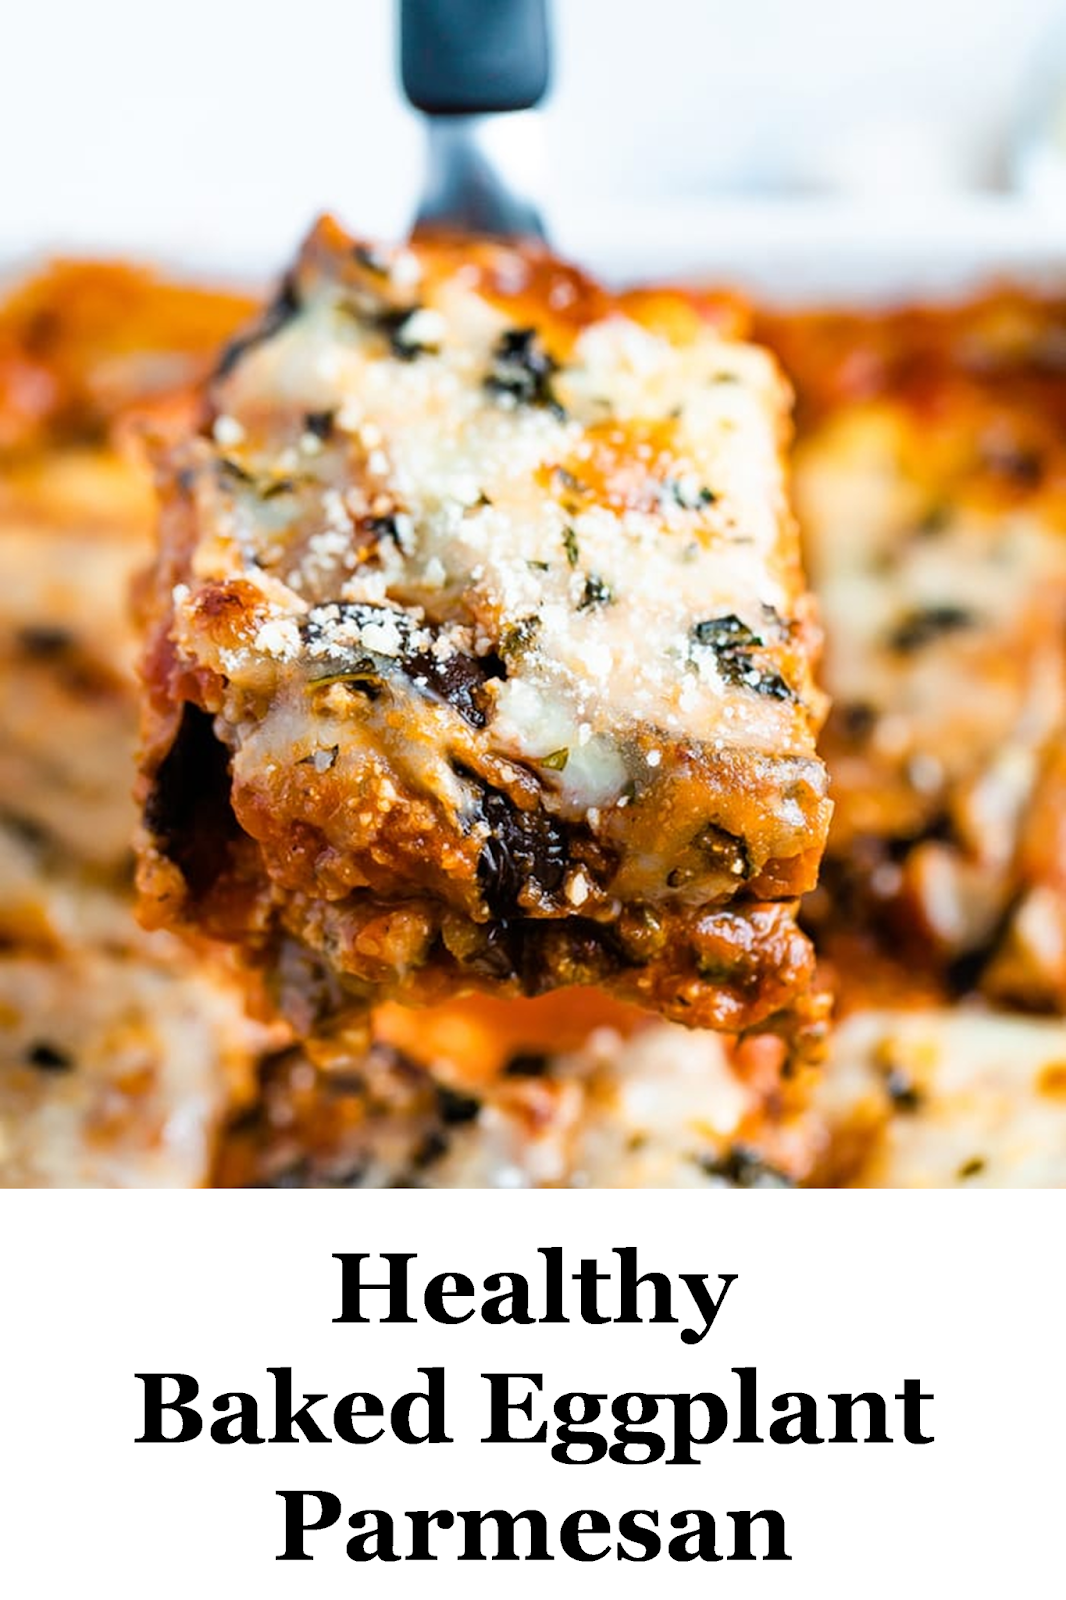 Healthy Baked Eggplant Parmesan | Recipes Update